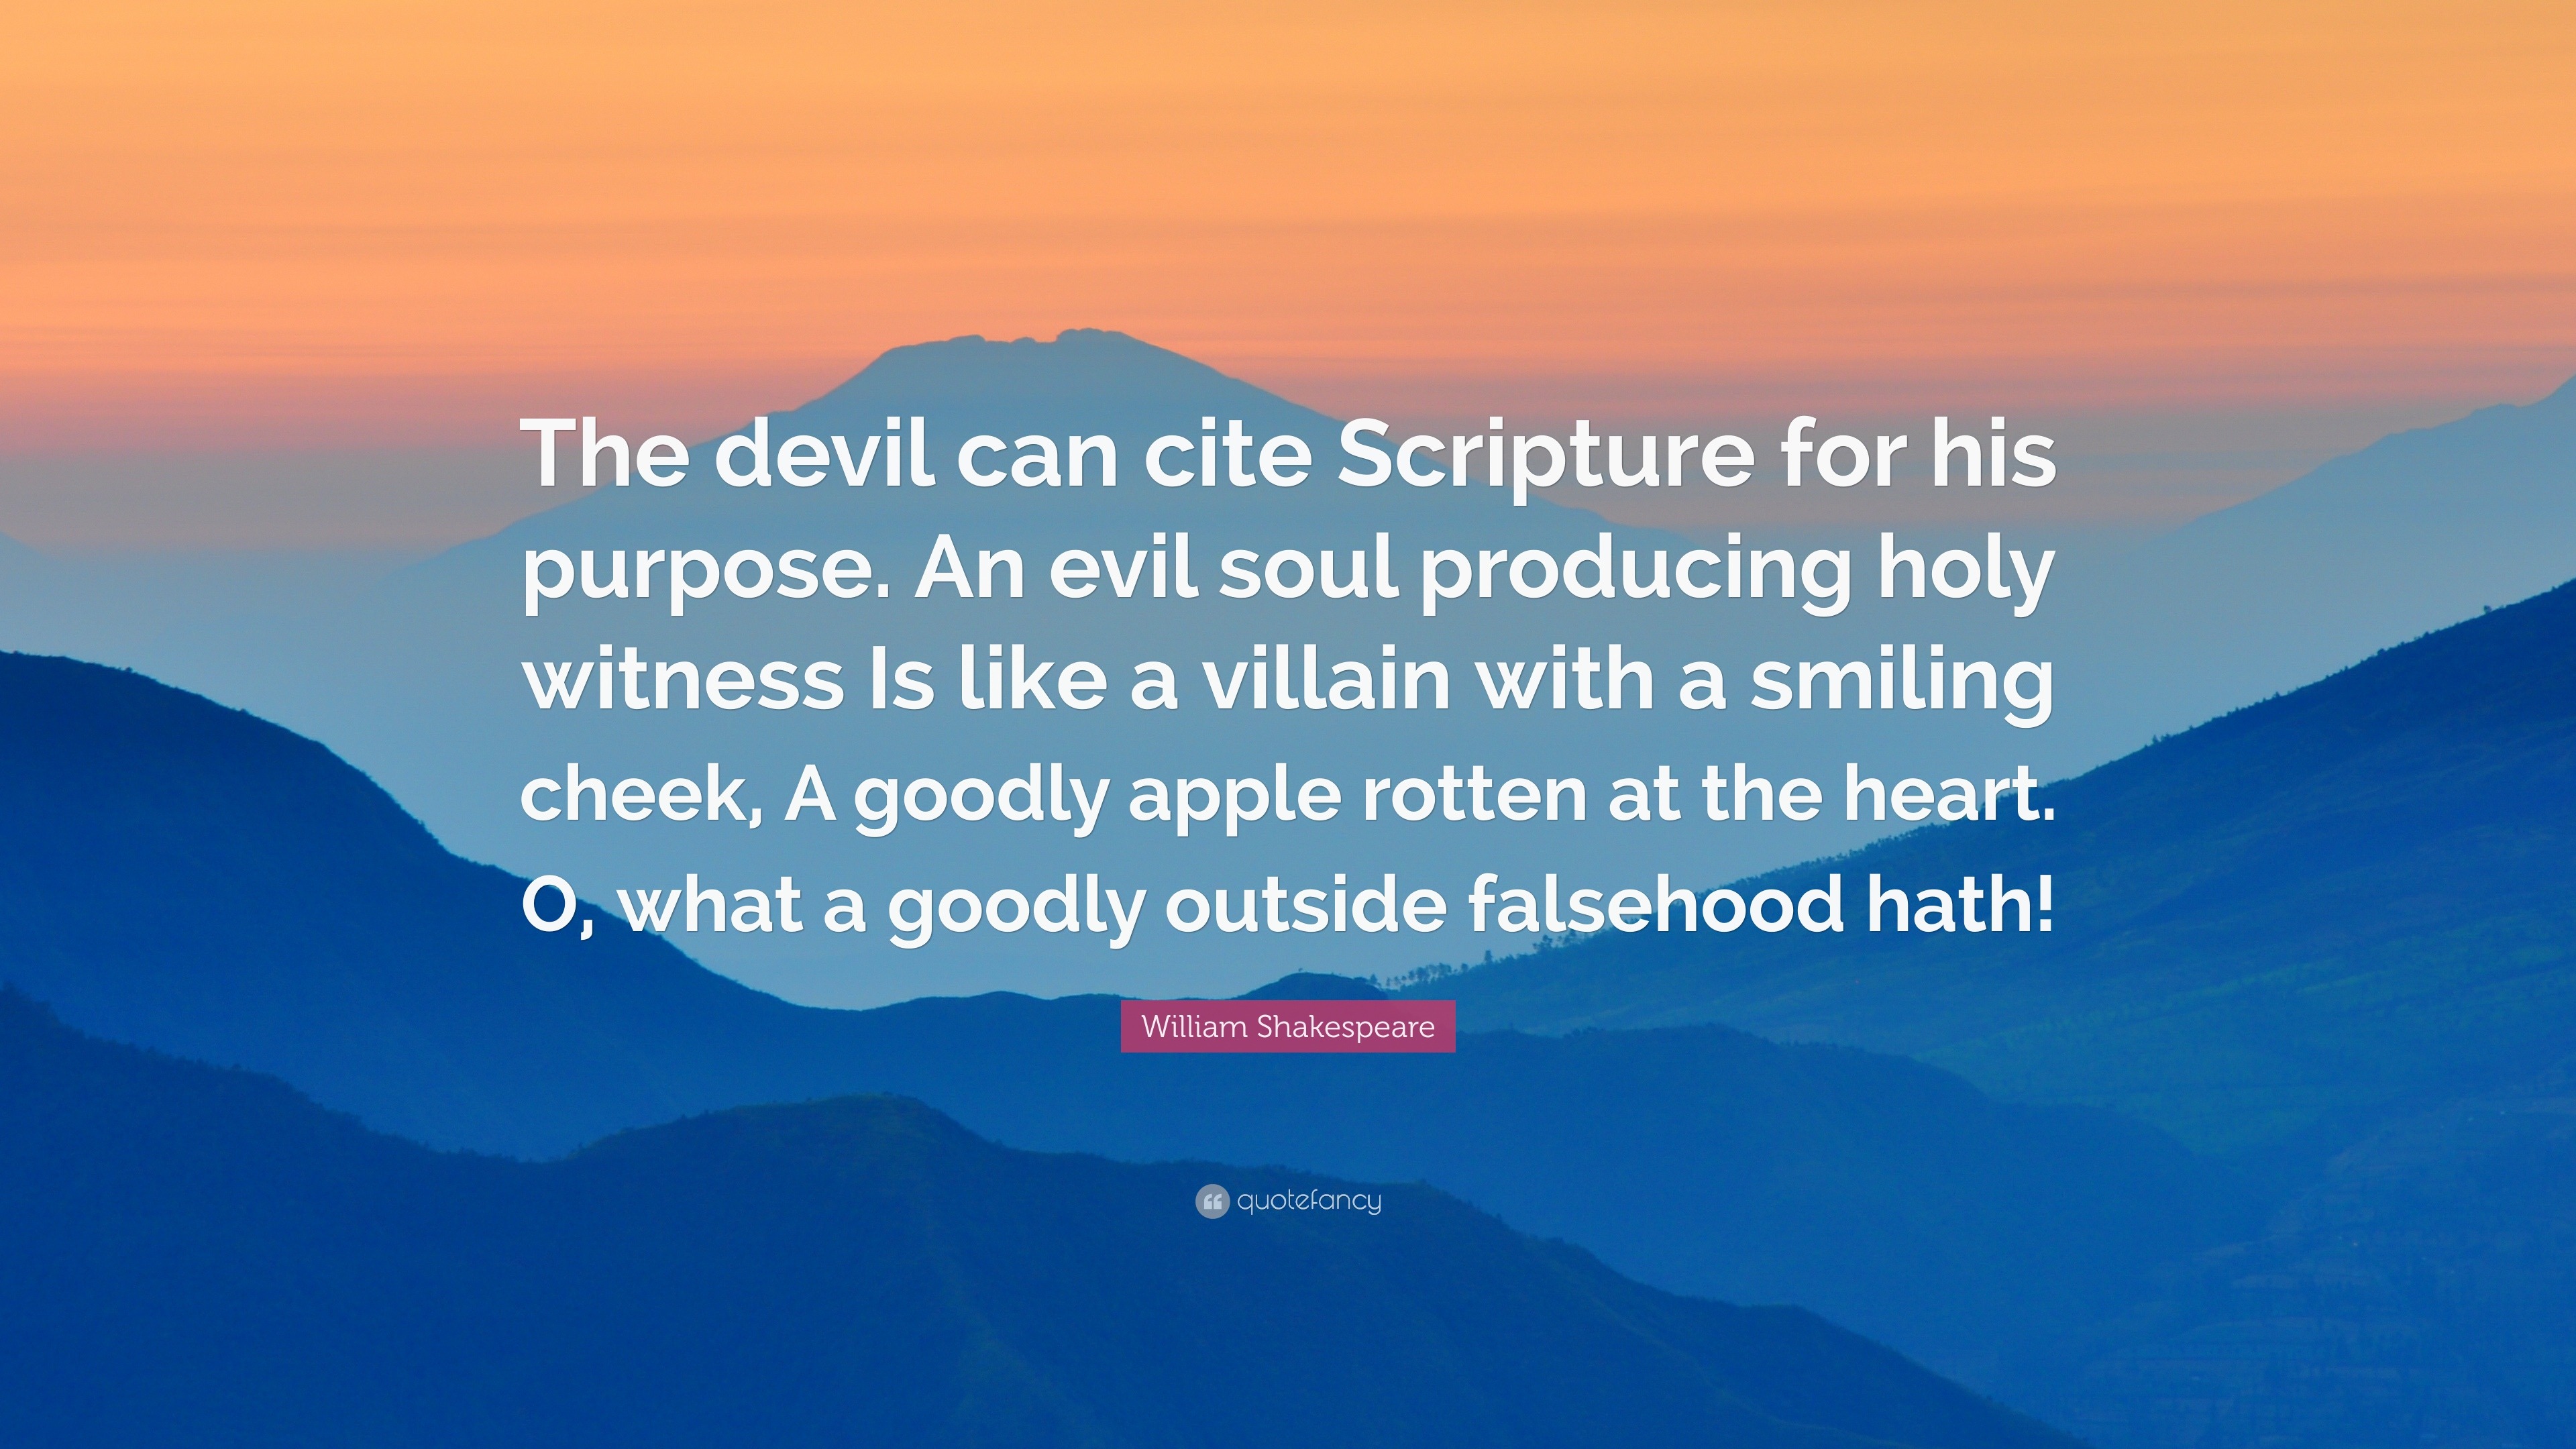 William Shakespeare Quote: "The devil can cite Scripture for his purpose. An evil soul producing ...